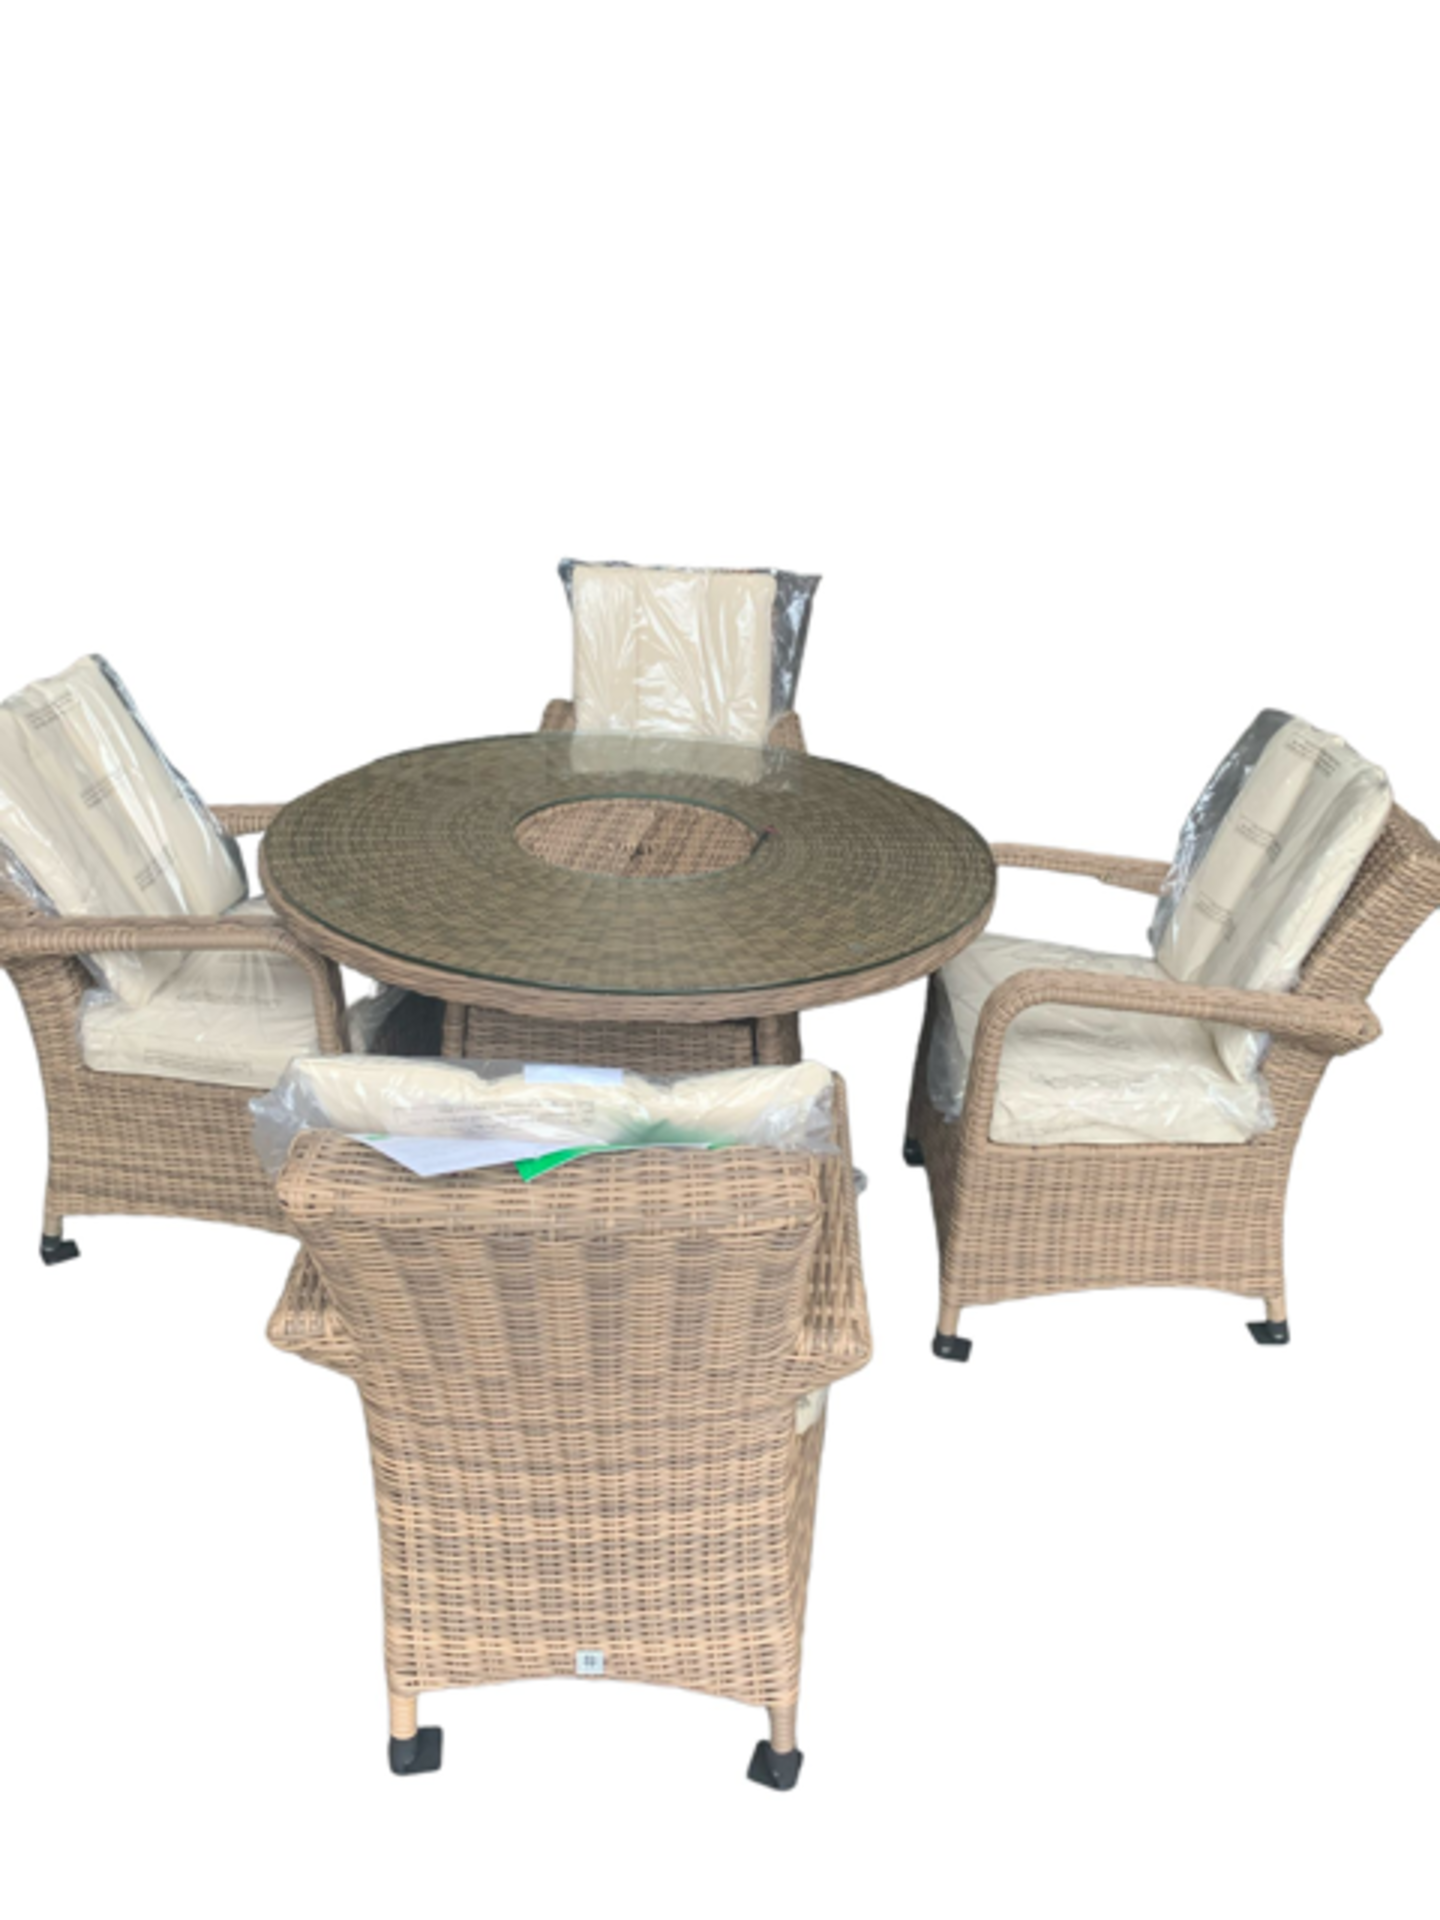 BRAND NEW 4 SEATER ROUND RATTAN DINING TABLE SET WITH ICE BUCKET AND WEATHER PROOF RAIN COVER. - Image 2 of 6